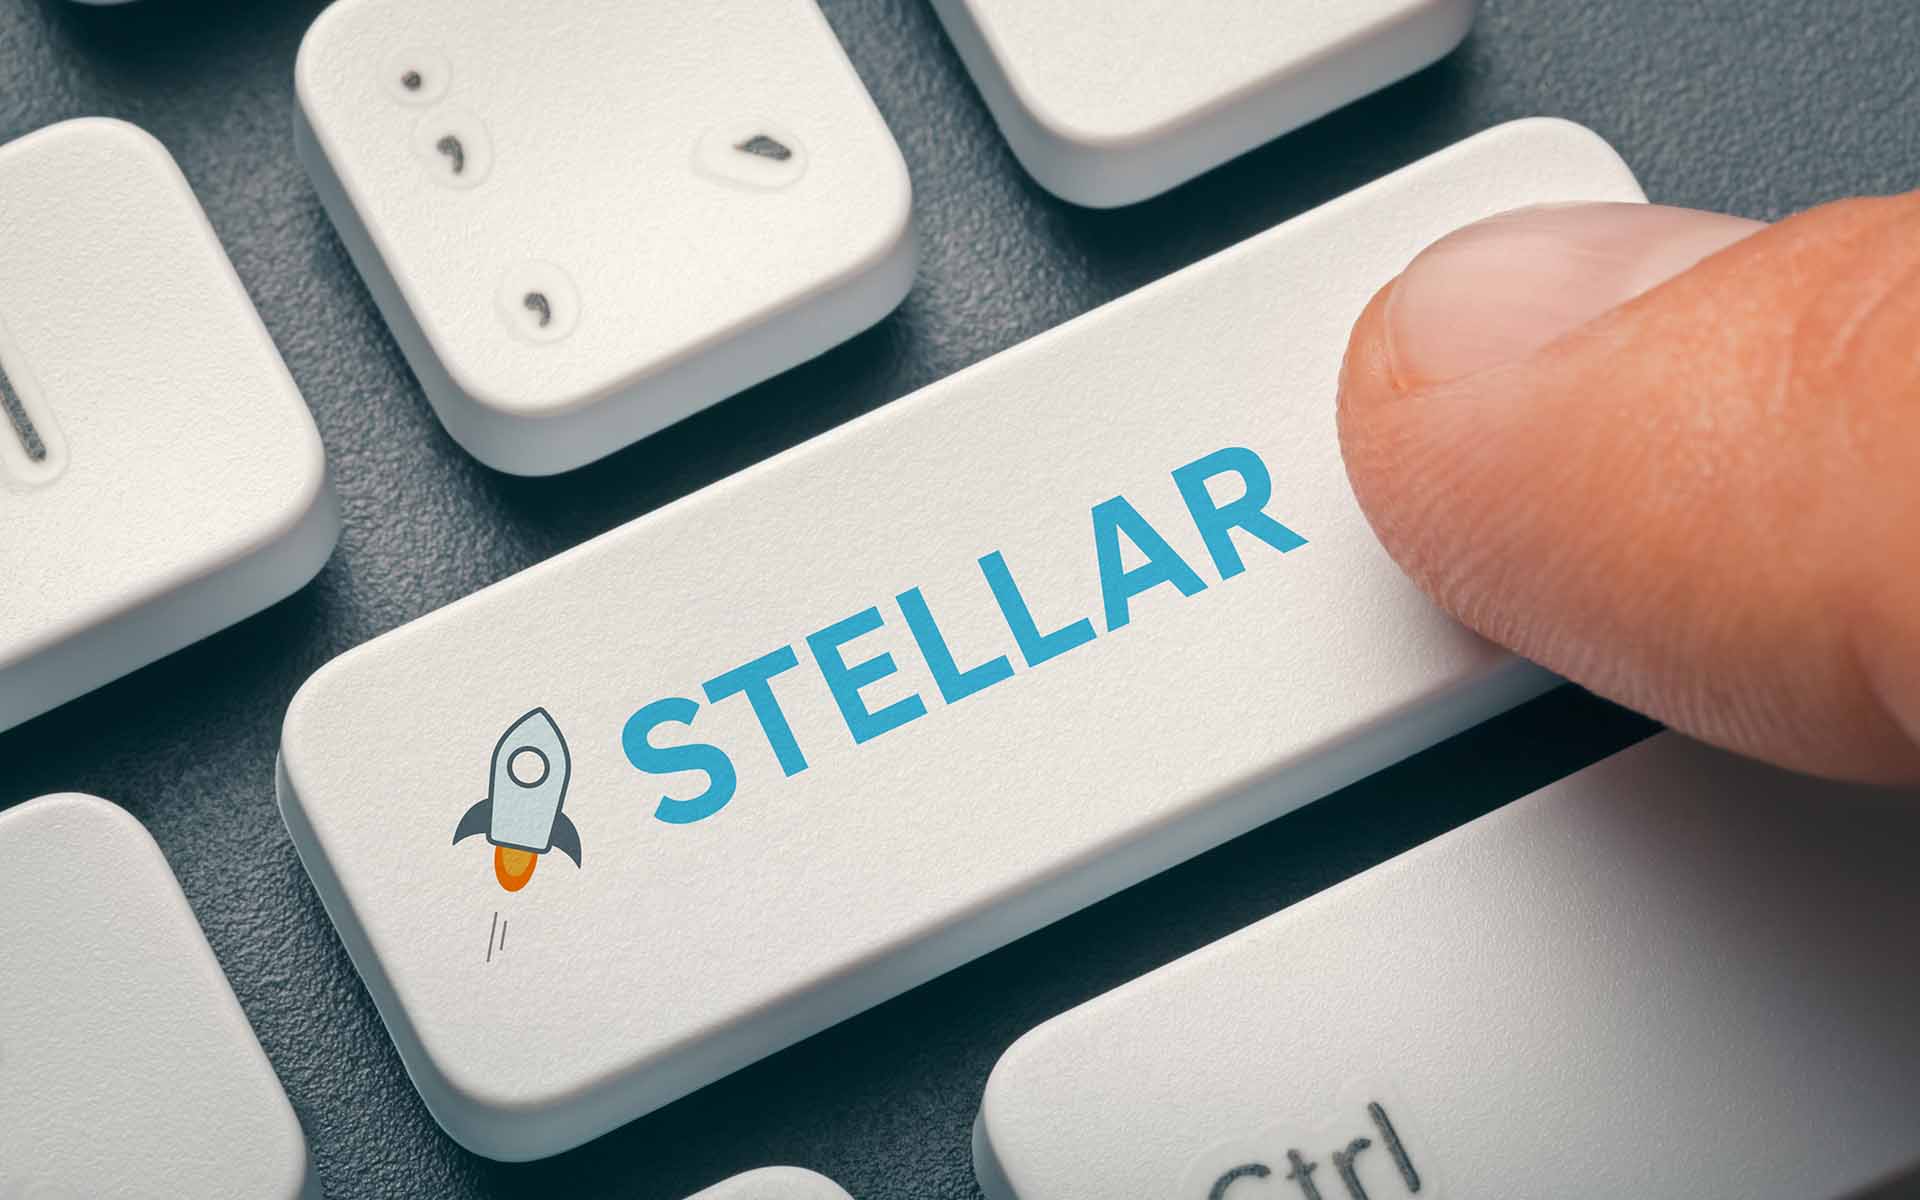 Stellar Buys Chain For $500M  But Insider Trading Suspicions Remain